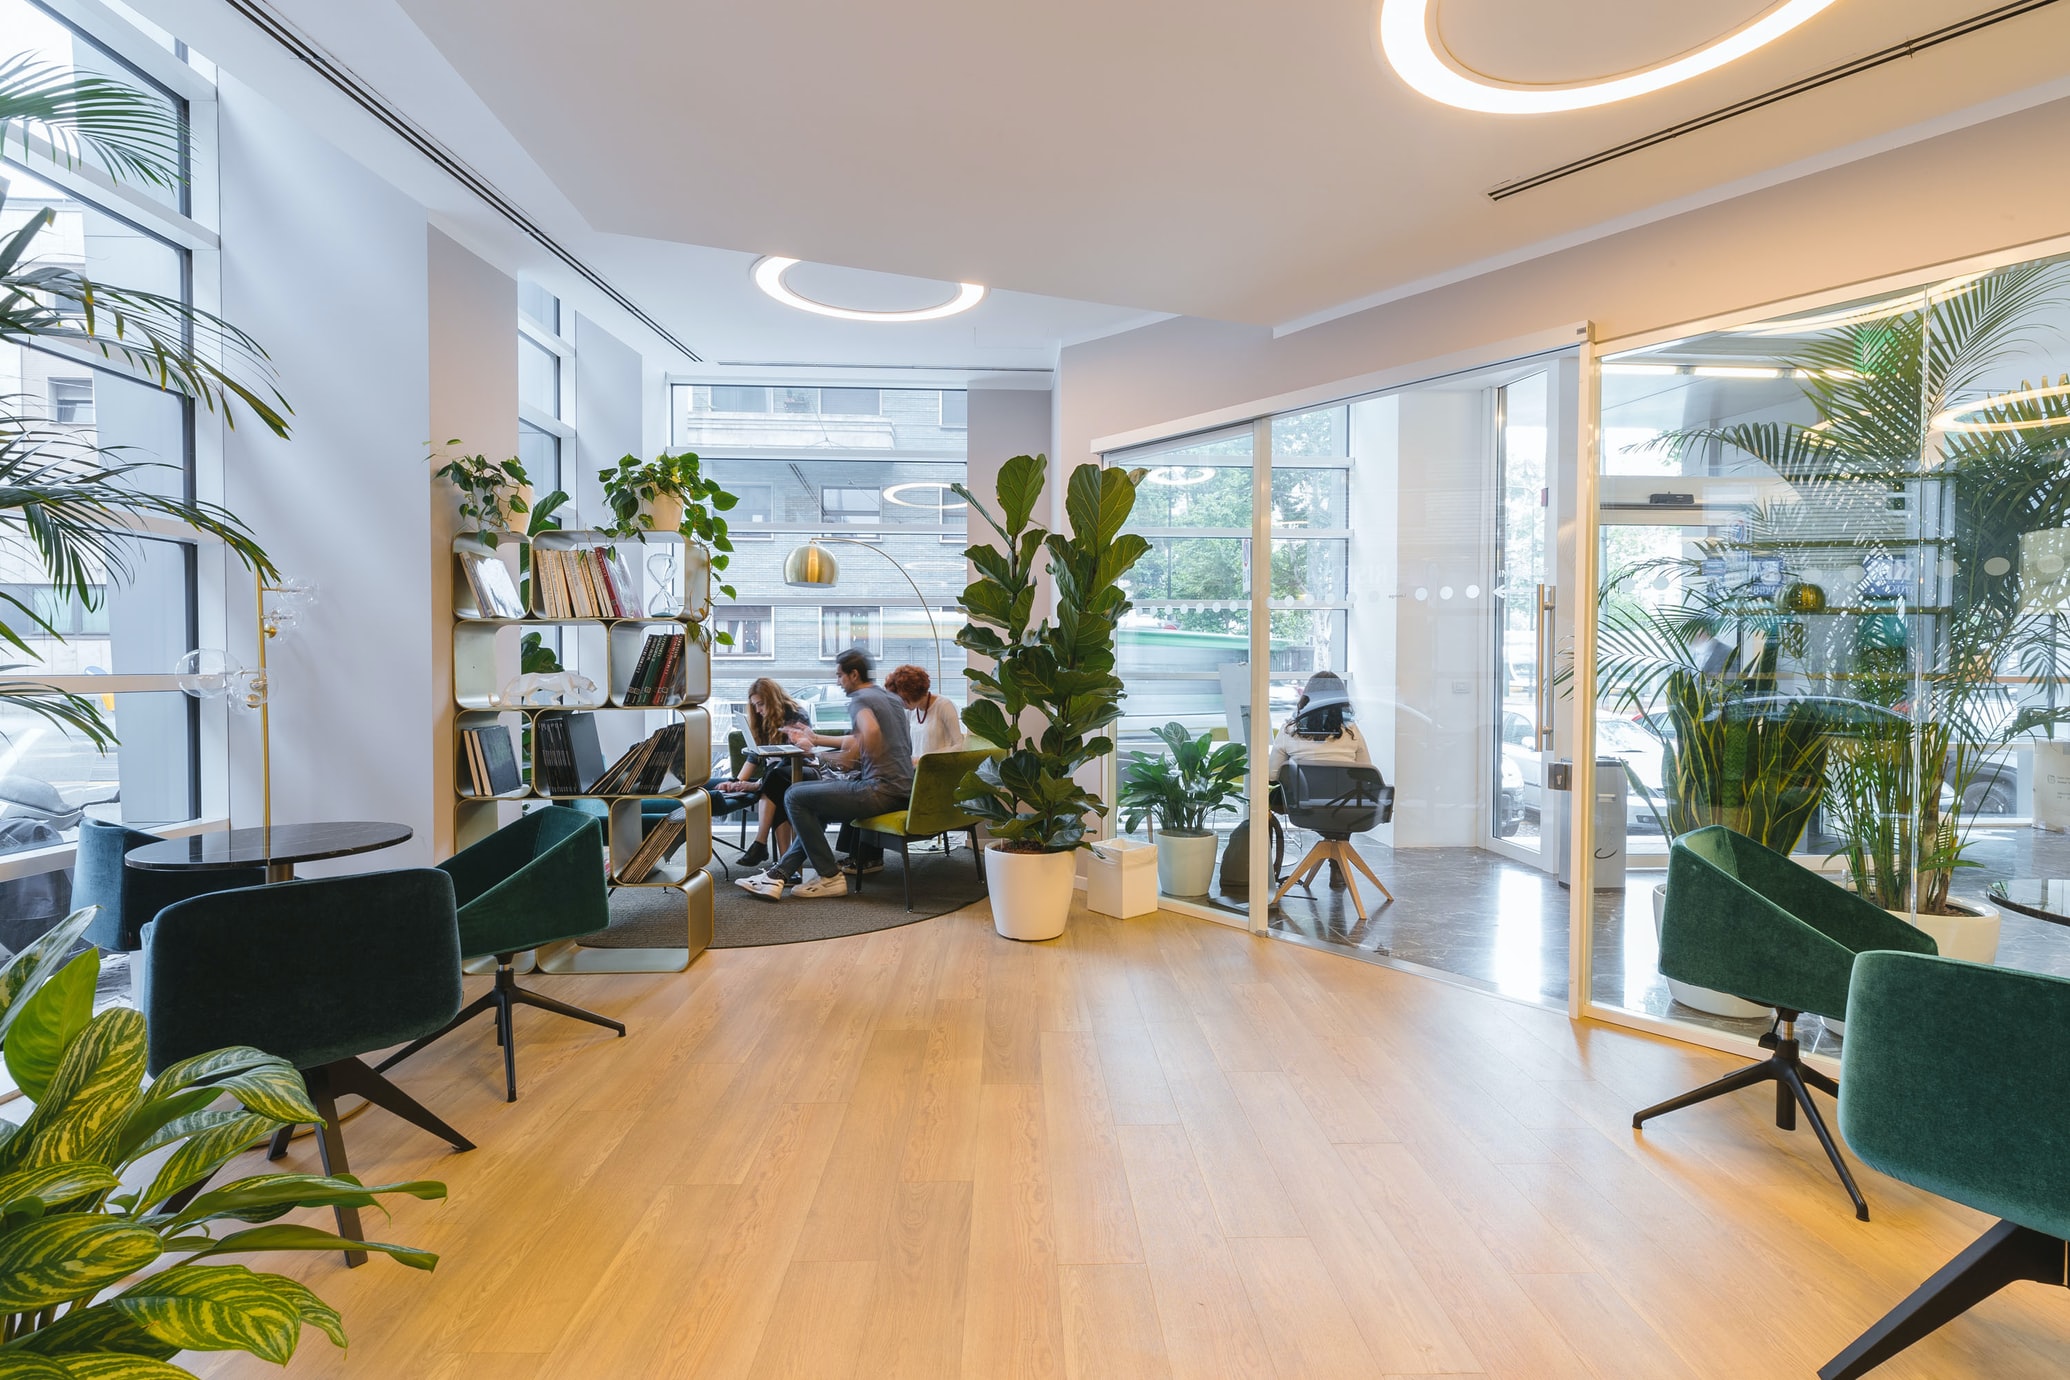 Flexible workspace market: The future of the industry